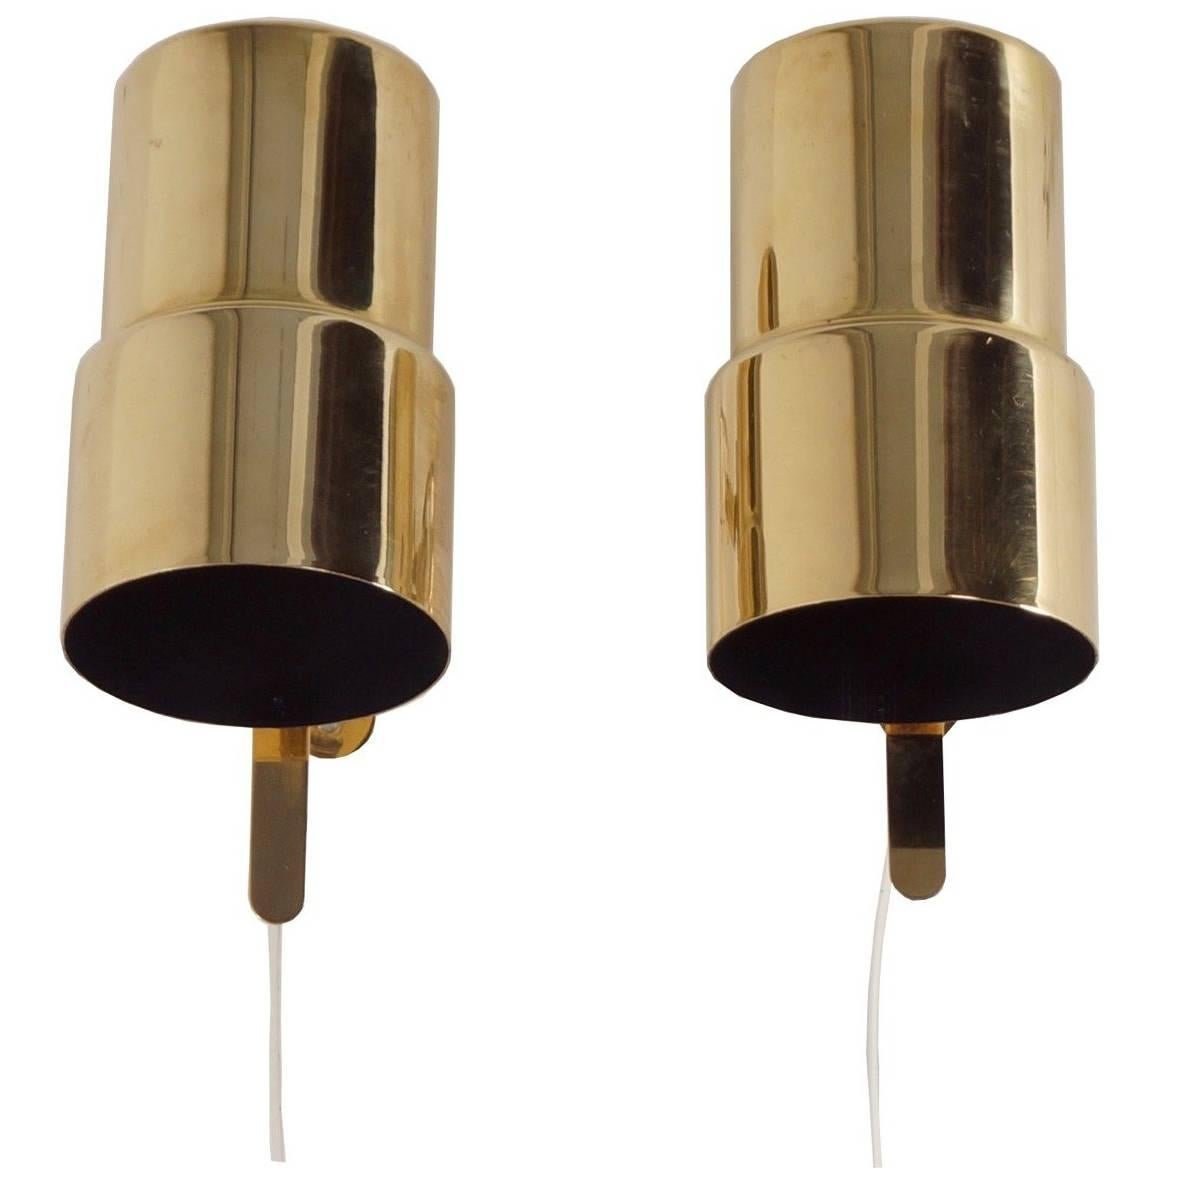 Brass Wall Lamps by Hans Agne Jakobsson for AB Markaryd, Set of Two, 1970s